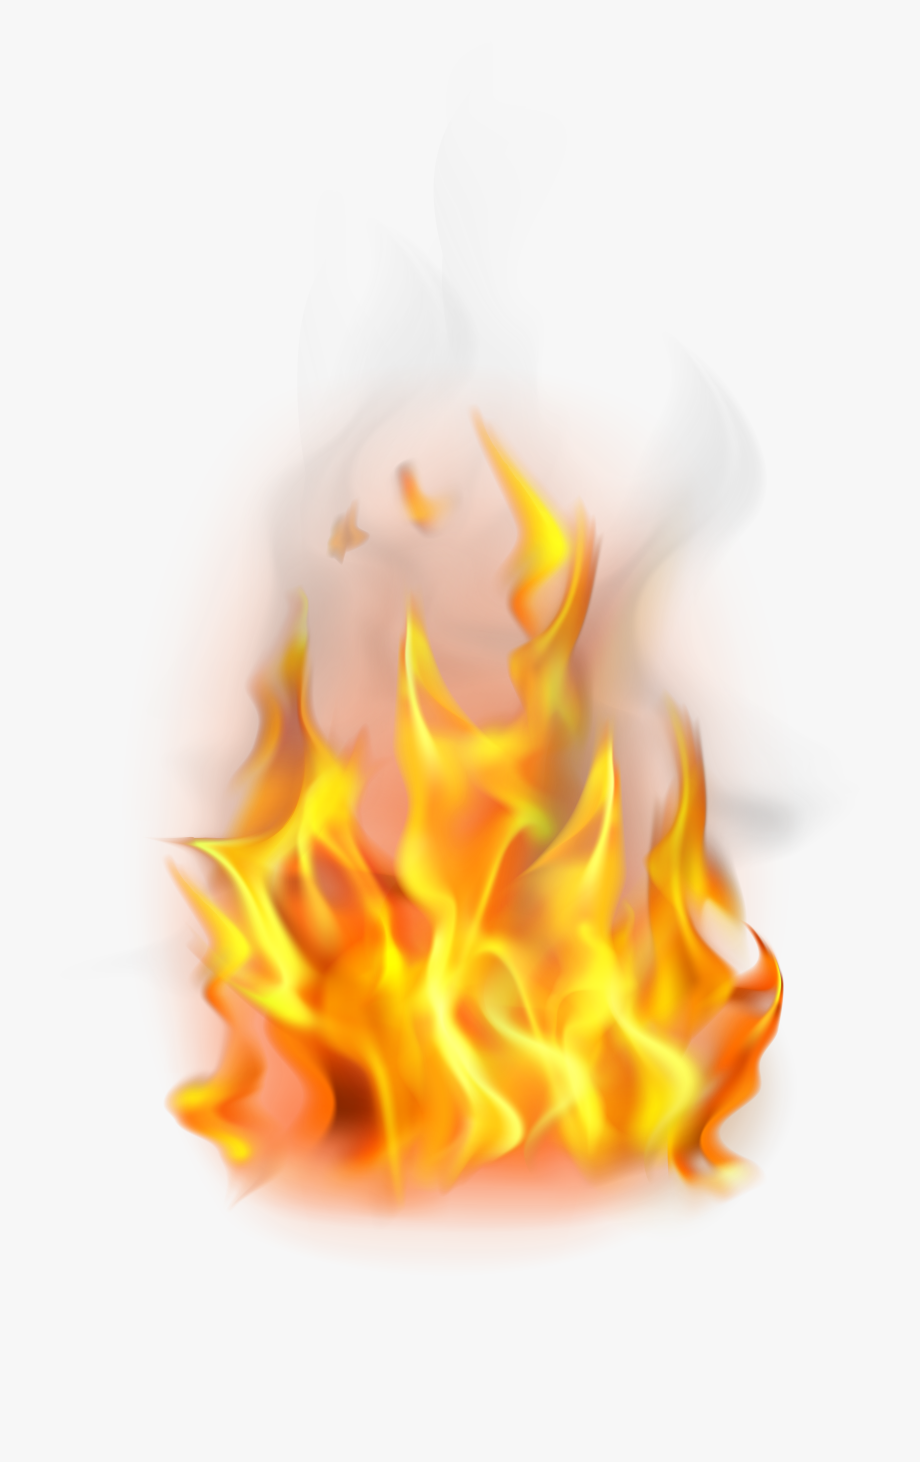 flames clipart fireplace flame